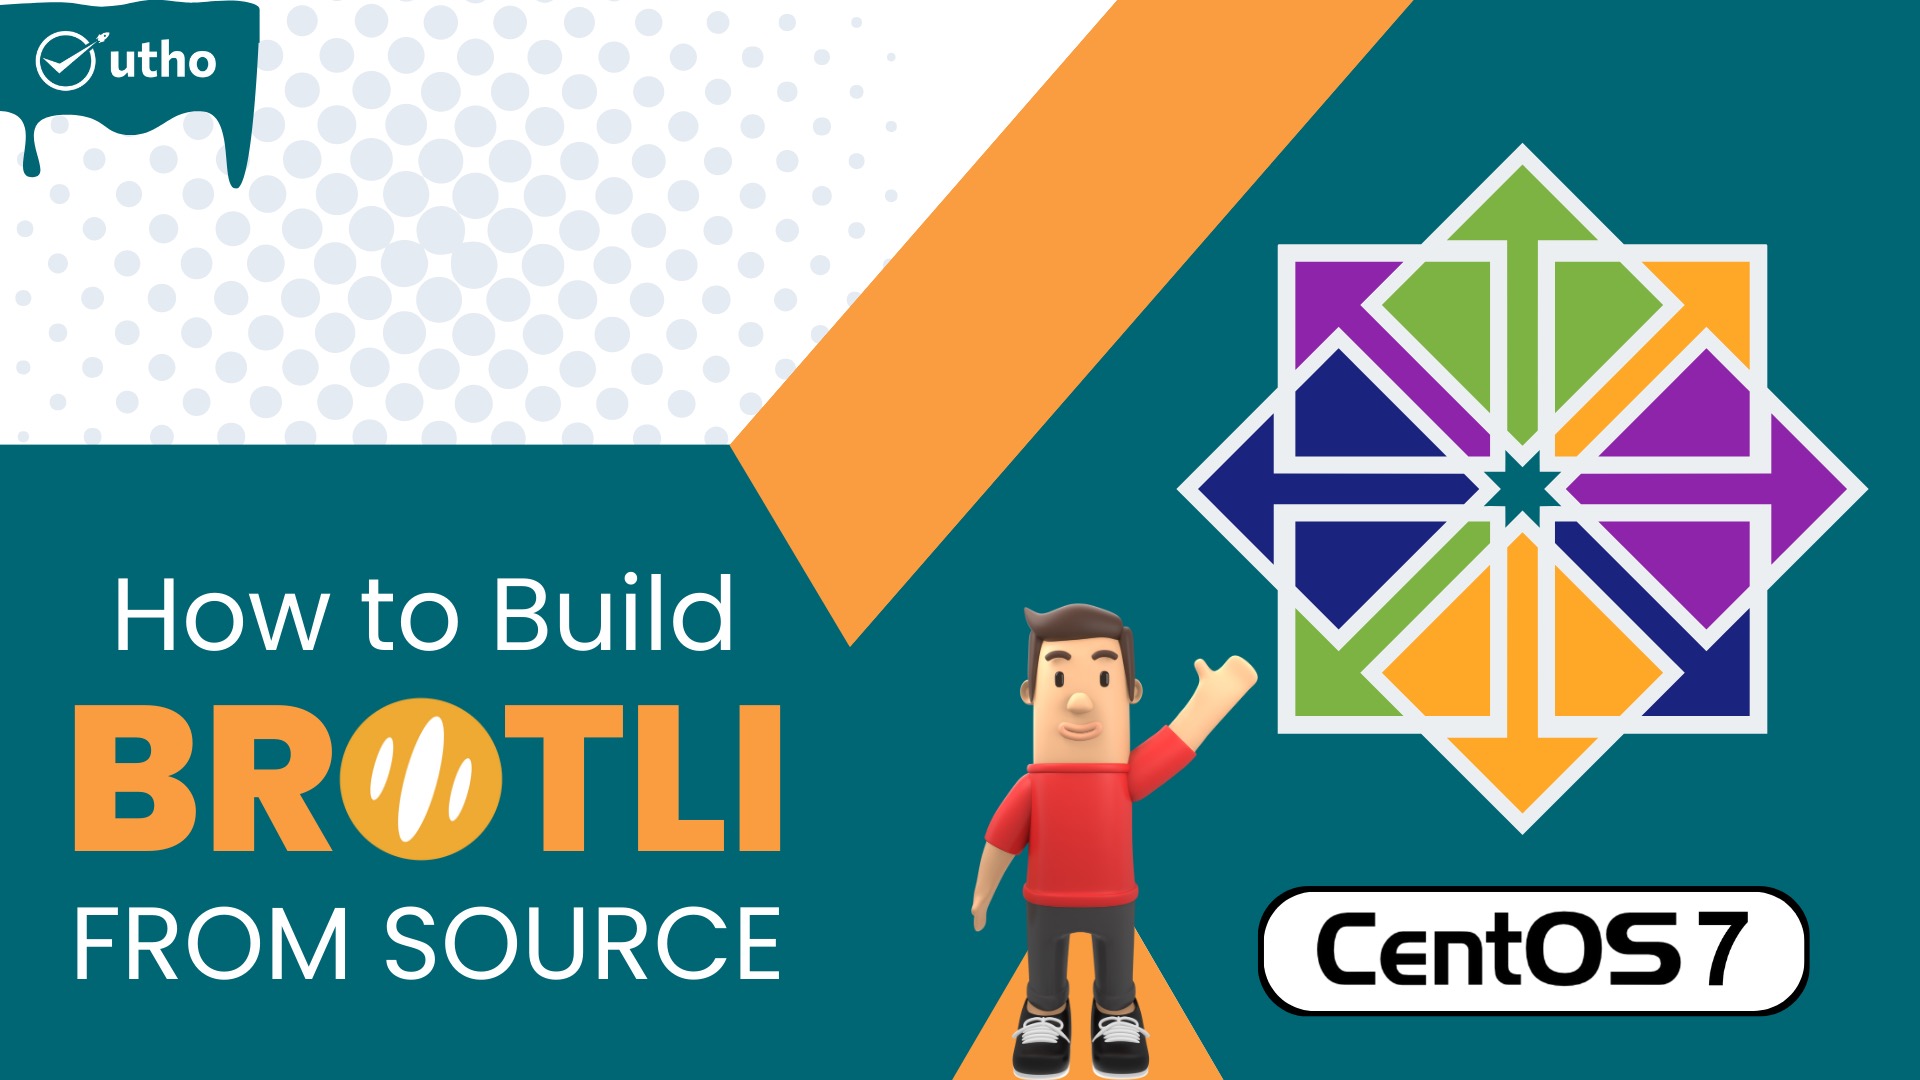 How to Build Brotli From Source on CentOS 7